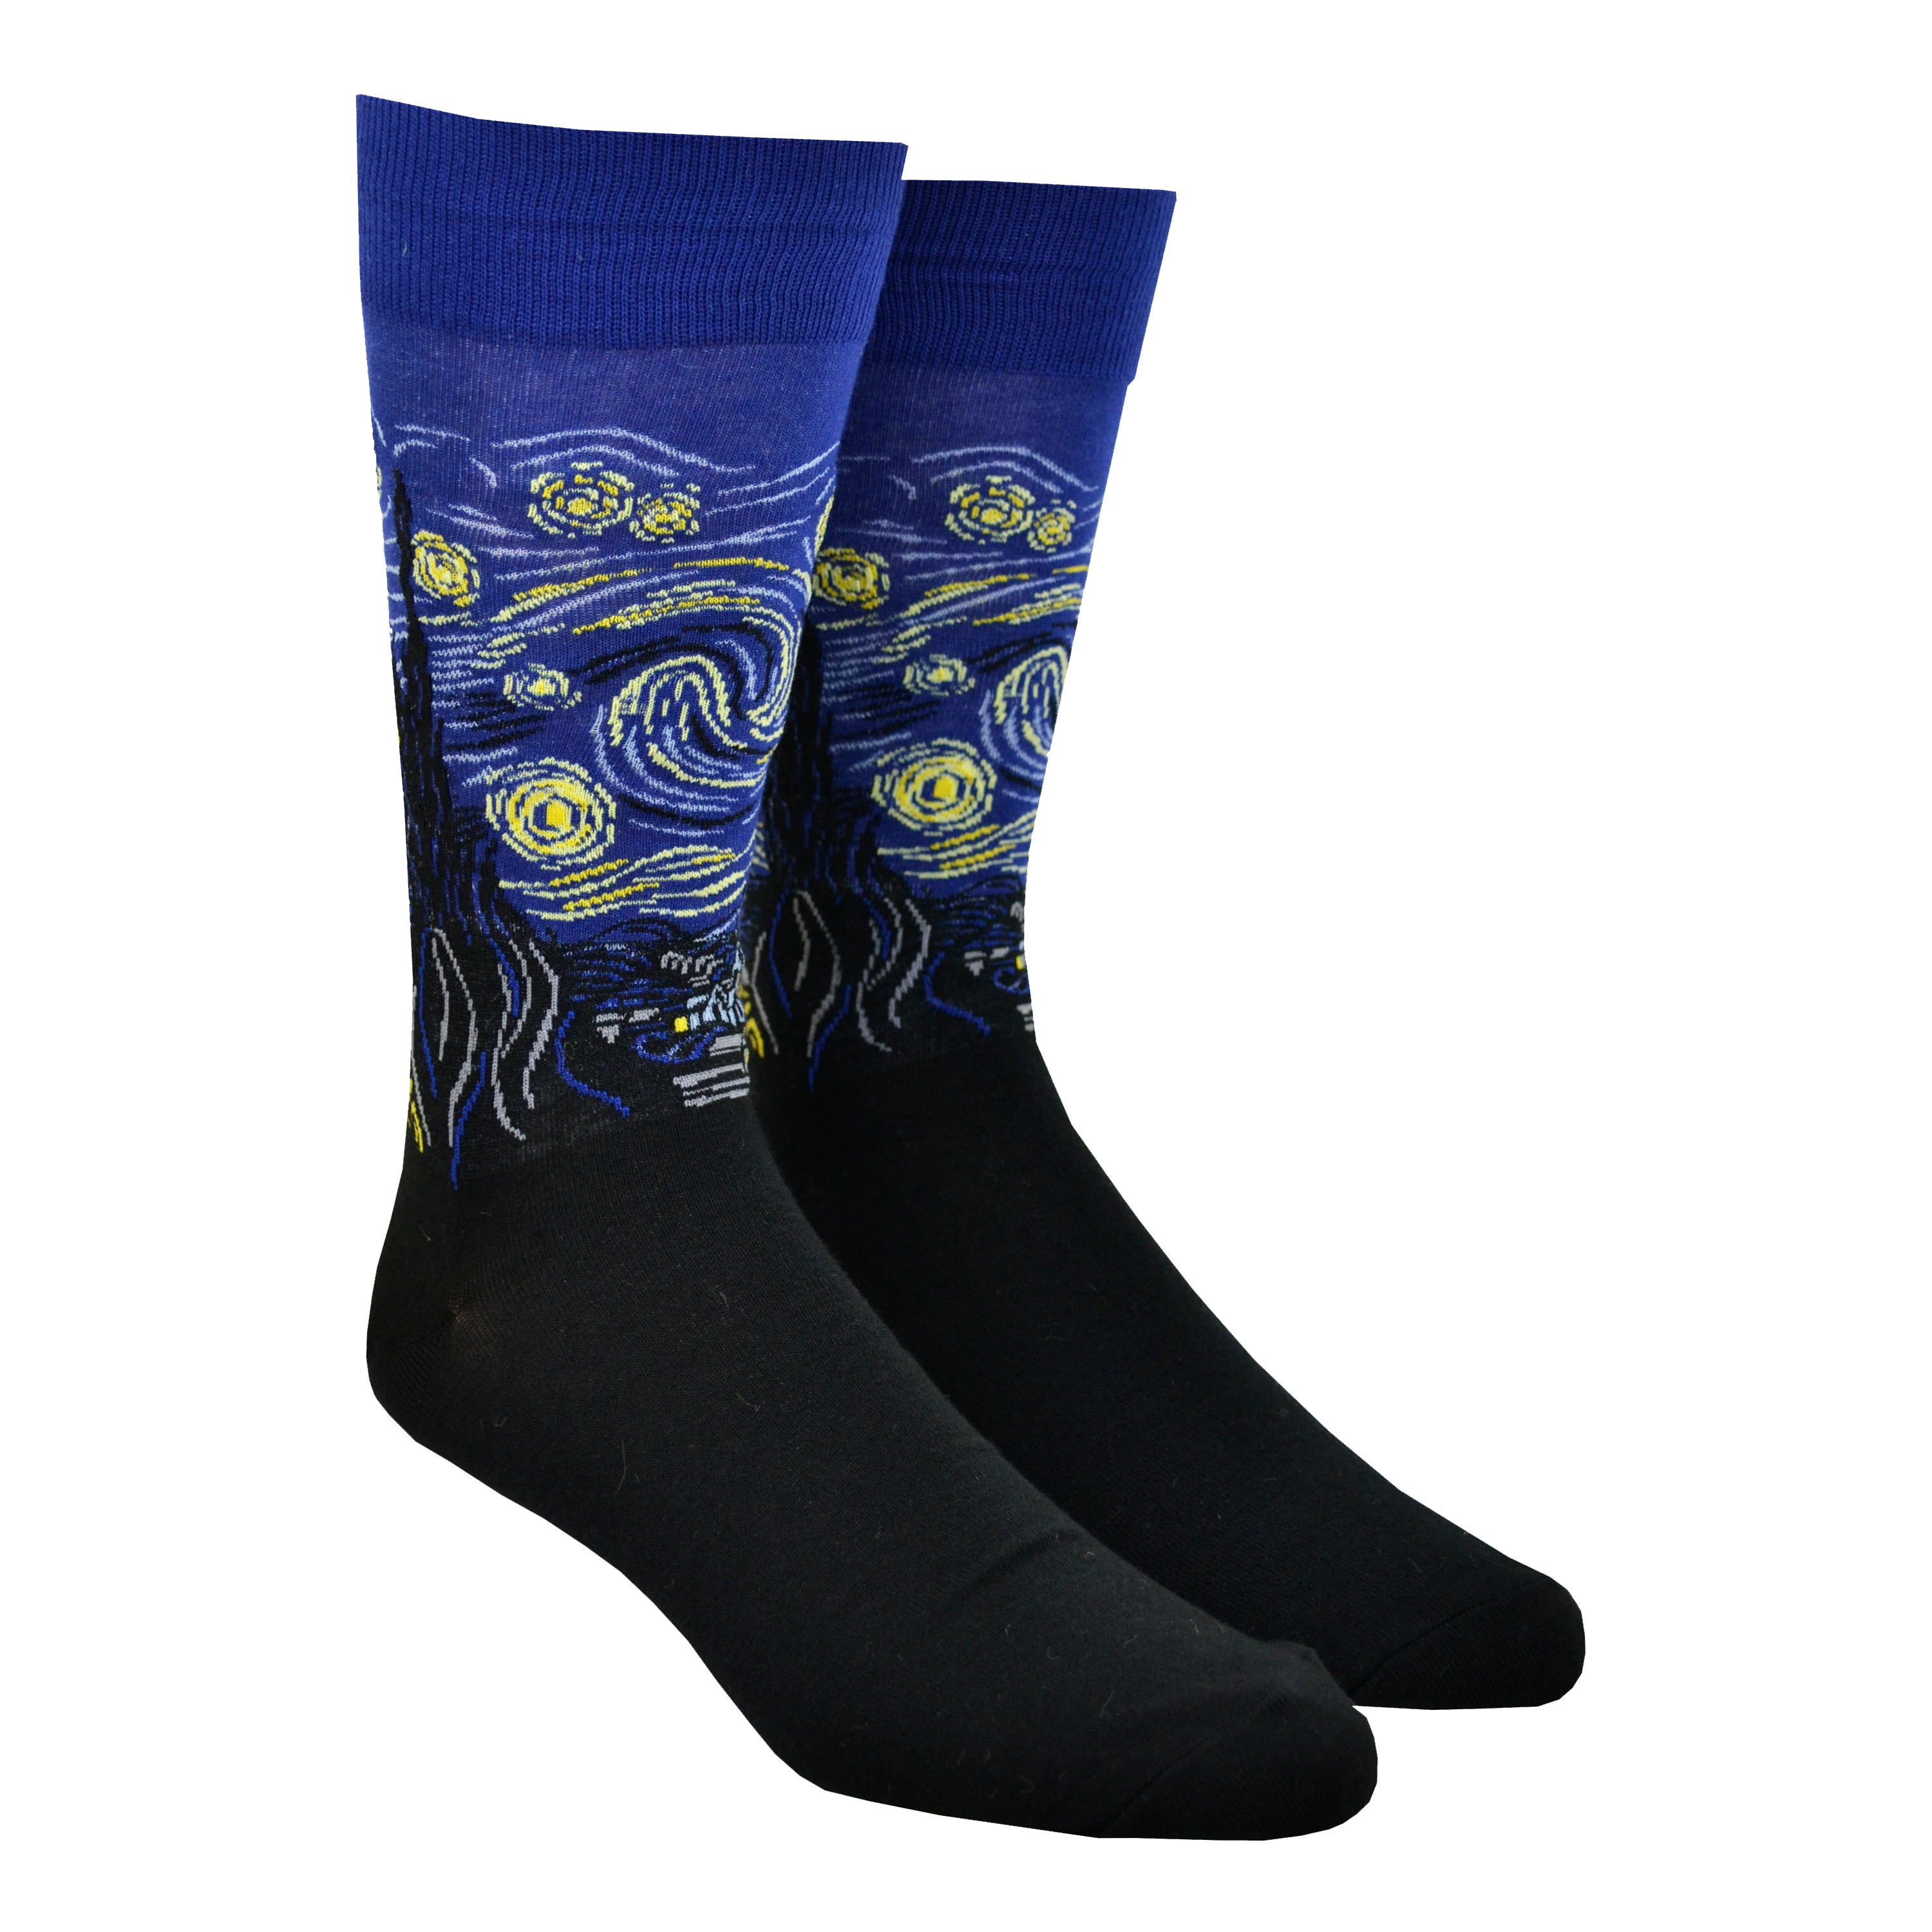 Shown on a leg form, these navy blue cotton men's crew socks by the brand Hot Sox feature the famous 